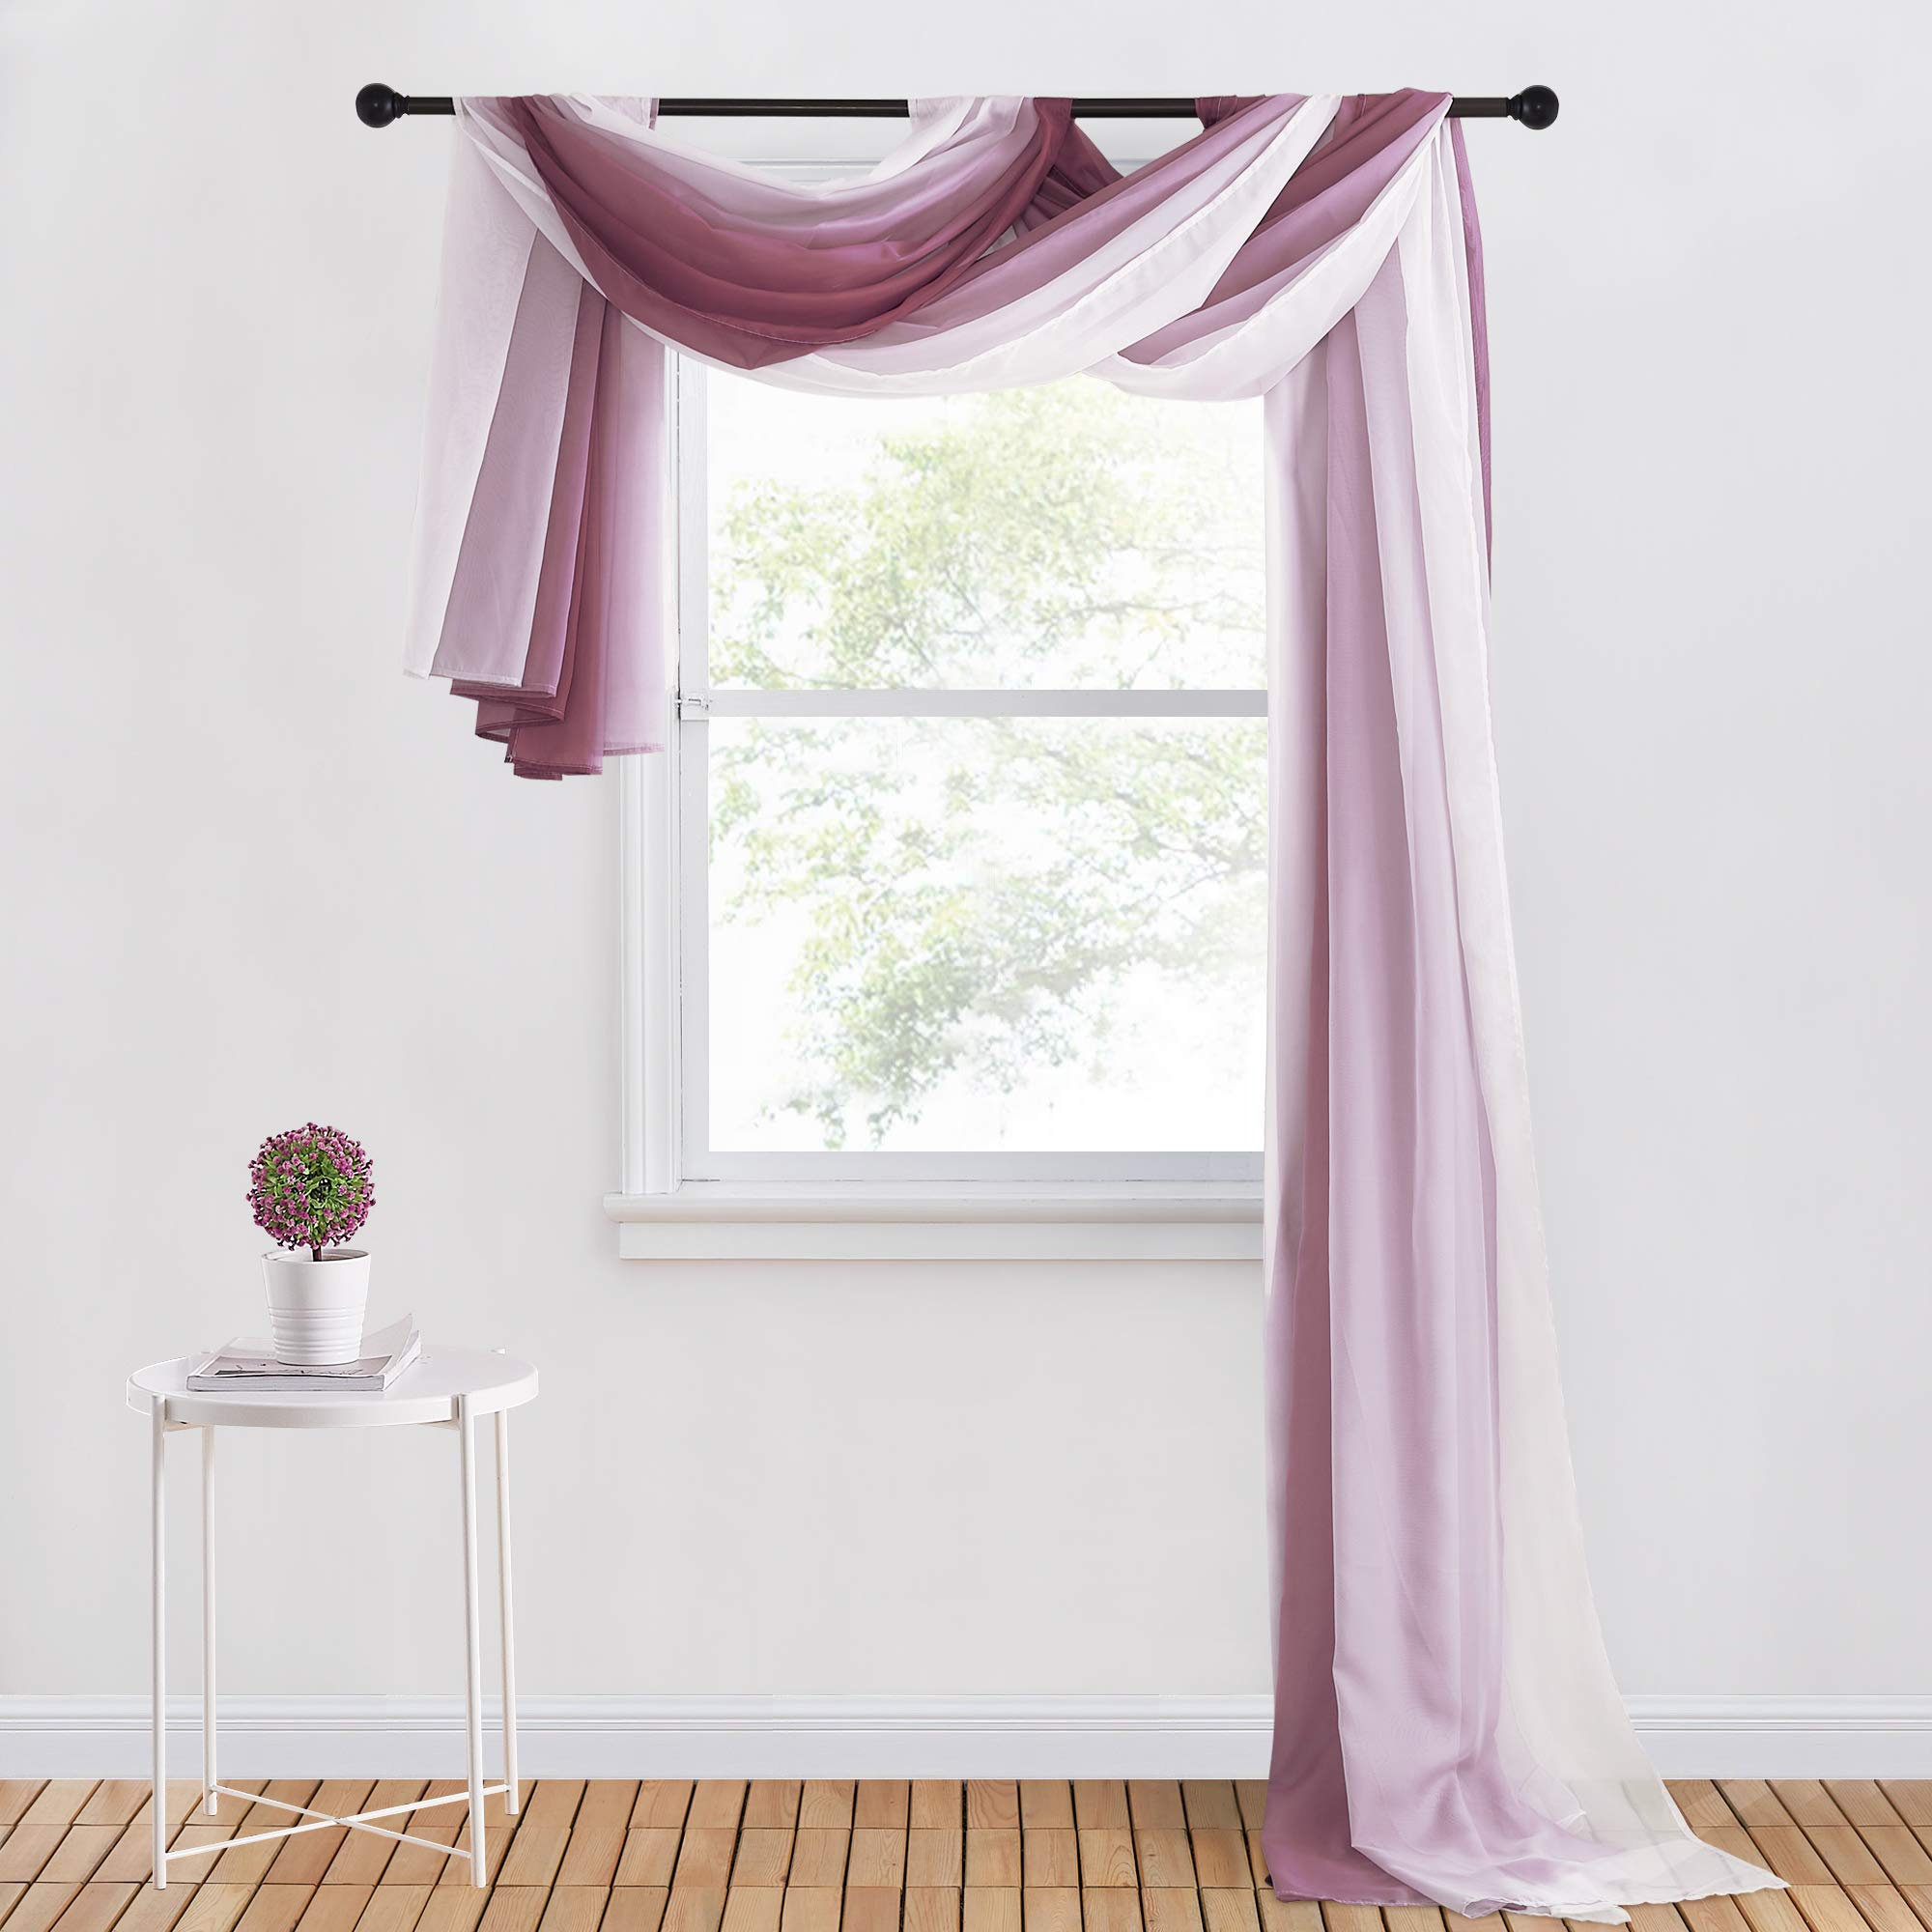 Decorative Wedding Arch Draping Scarf Curtains W60 x L216 Demure Mauve Outdoor 